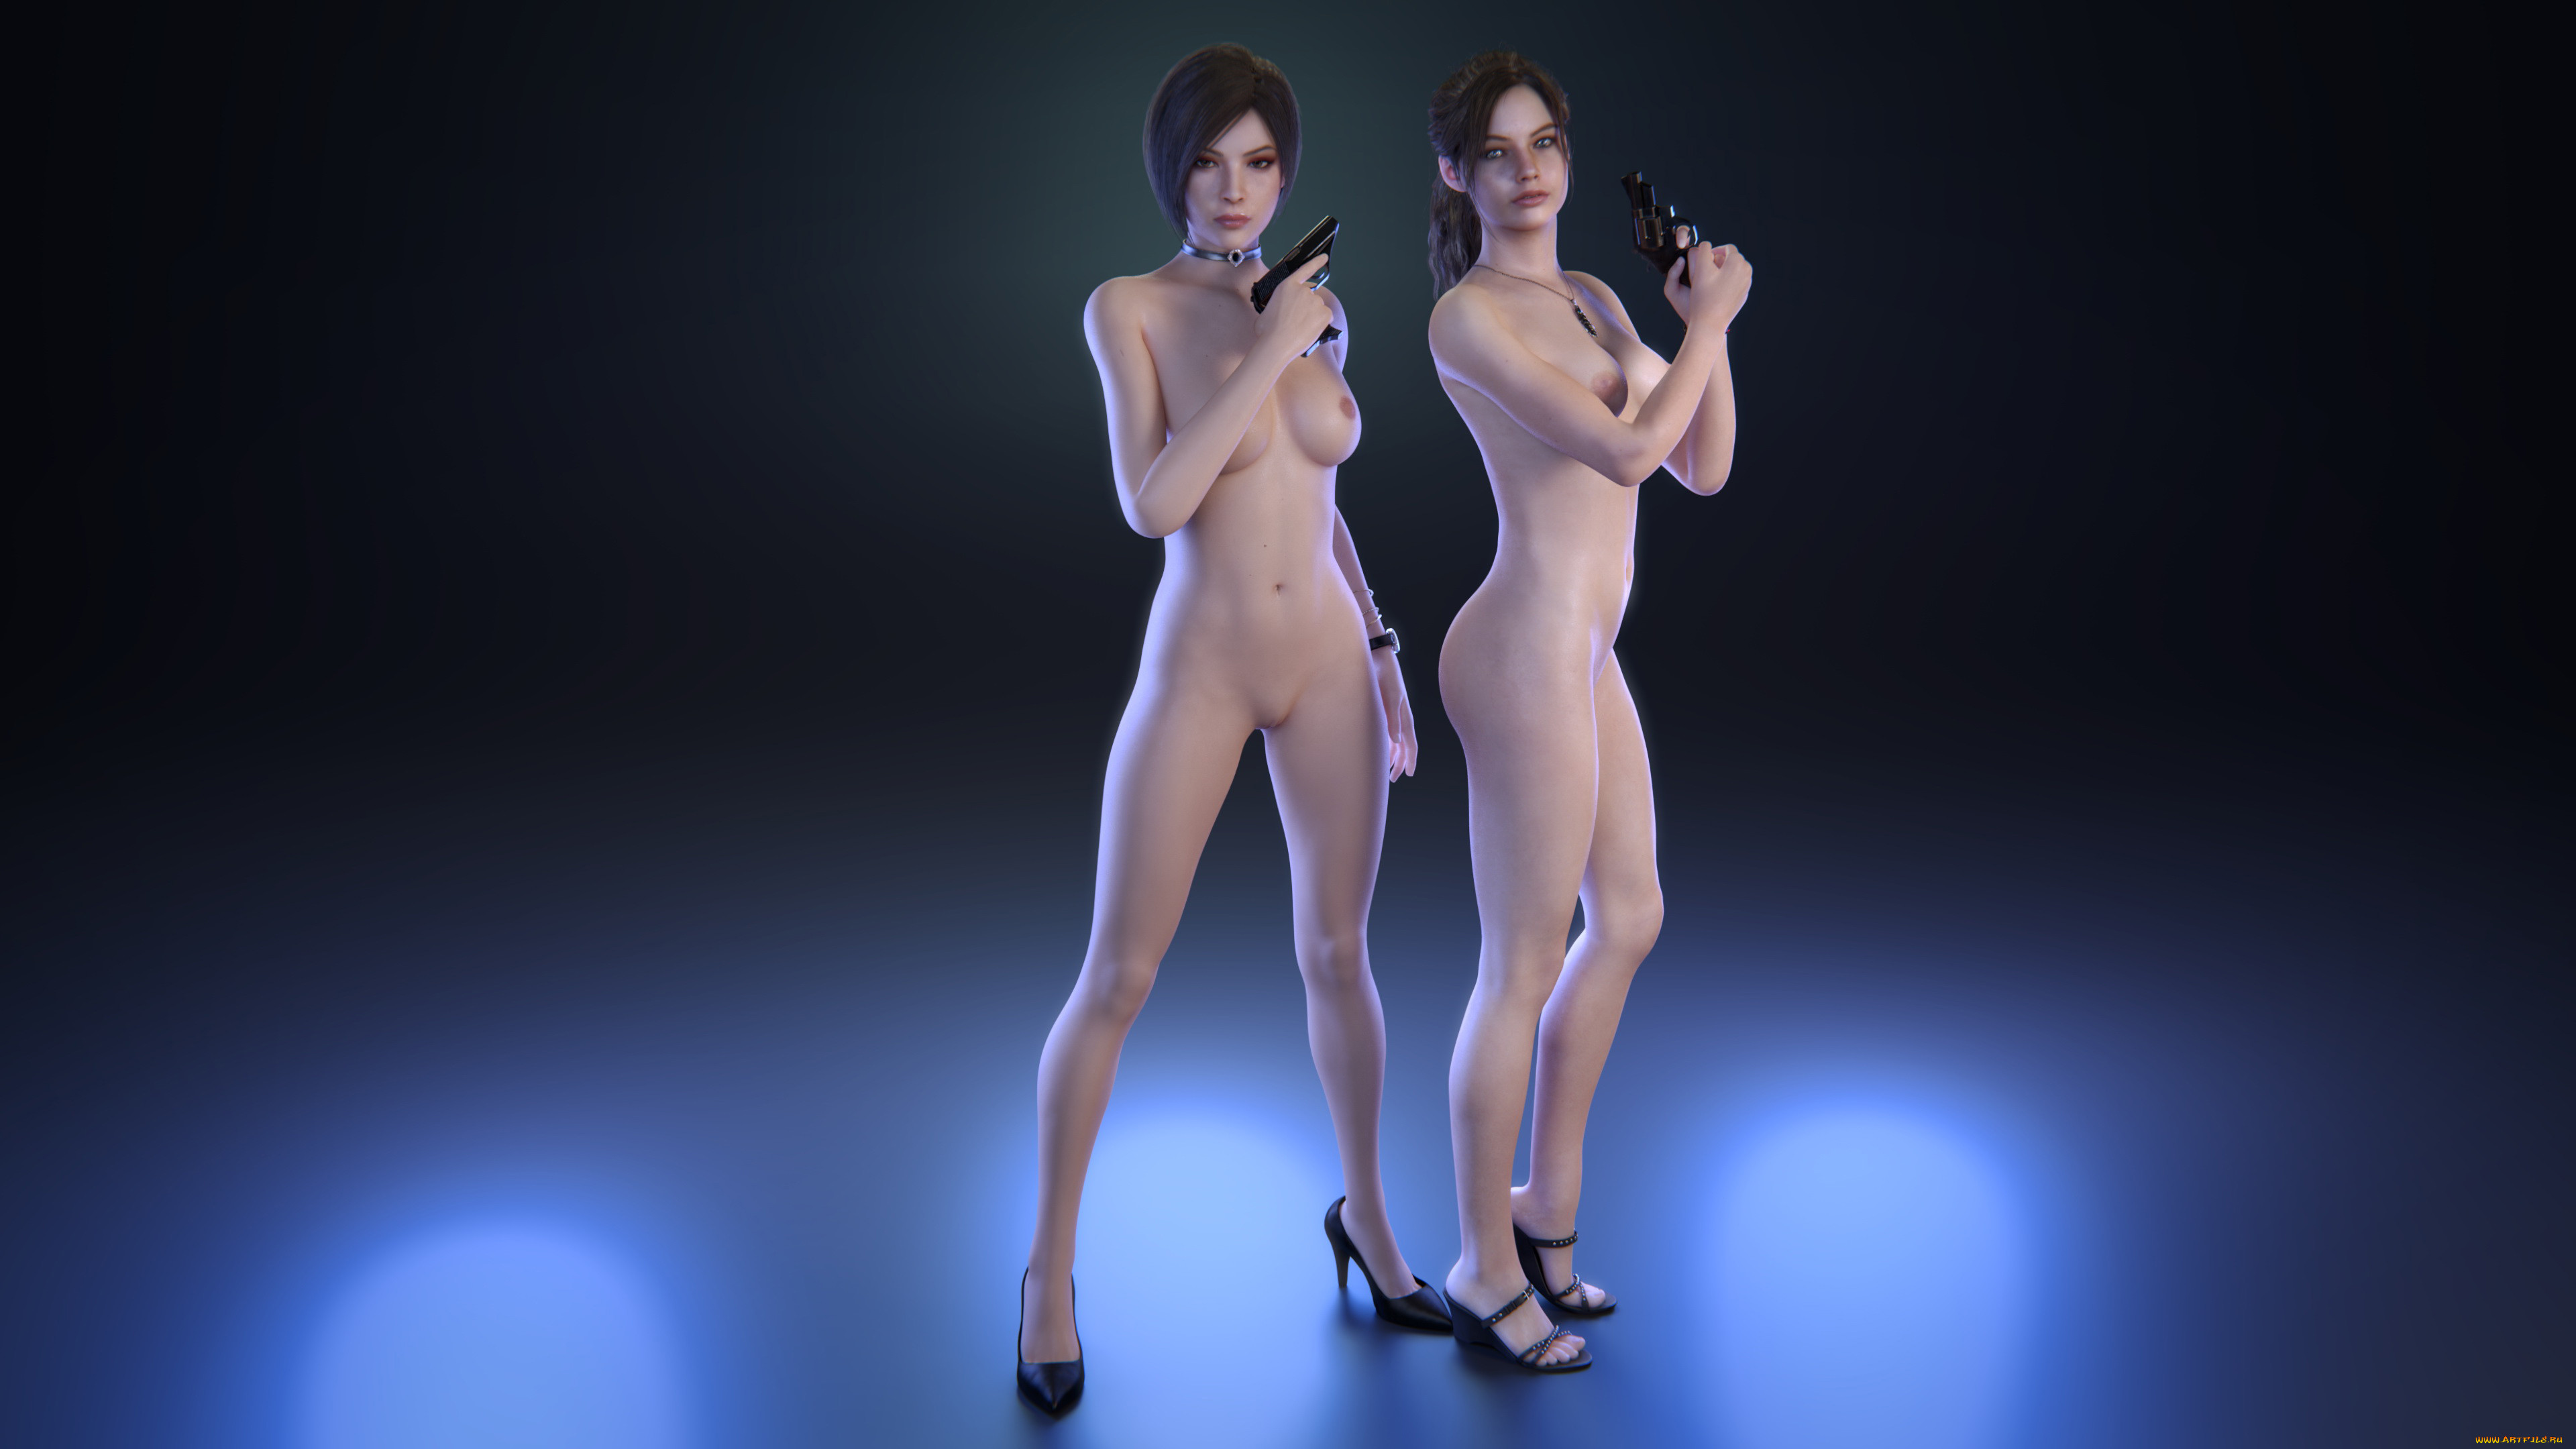 Claire max nude - 🧡 Resident Evil 2 Remake mods (alphaZomega) - Adult Gami...